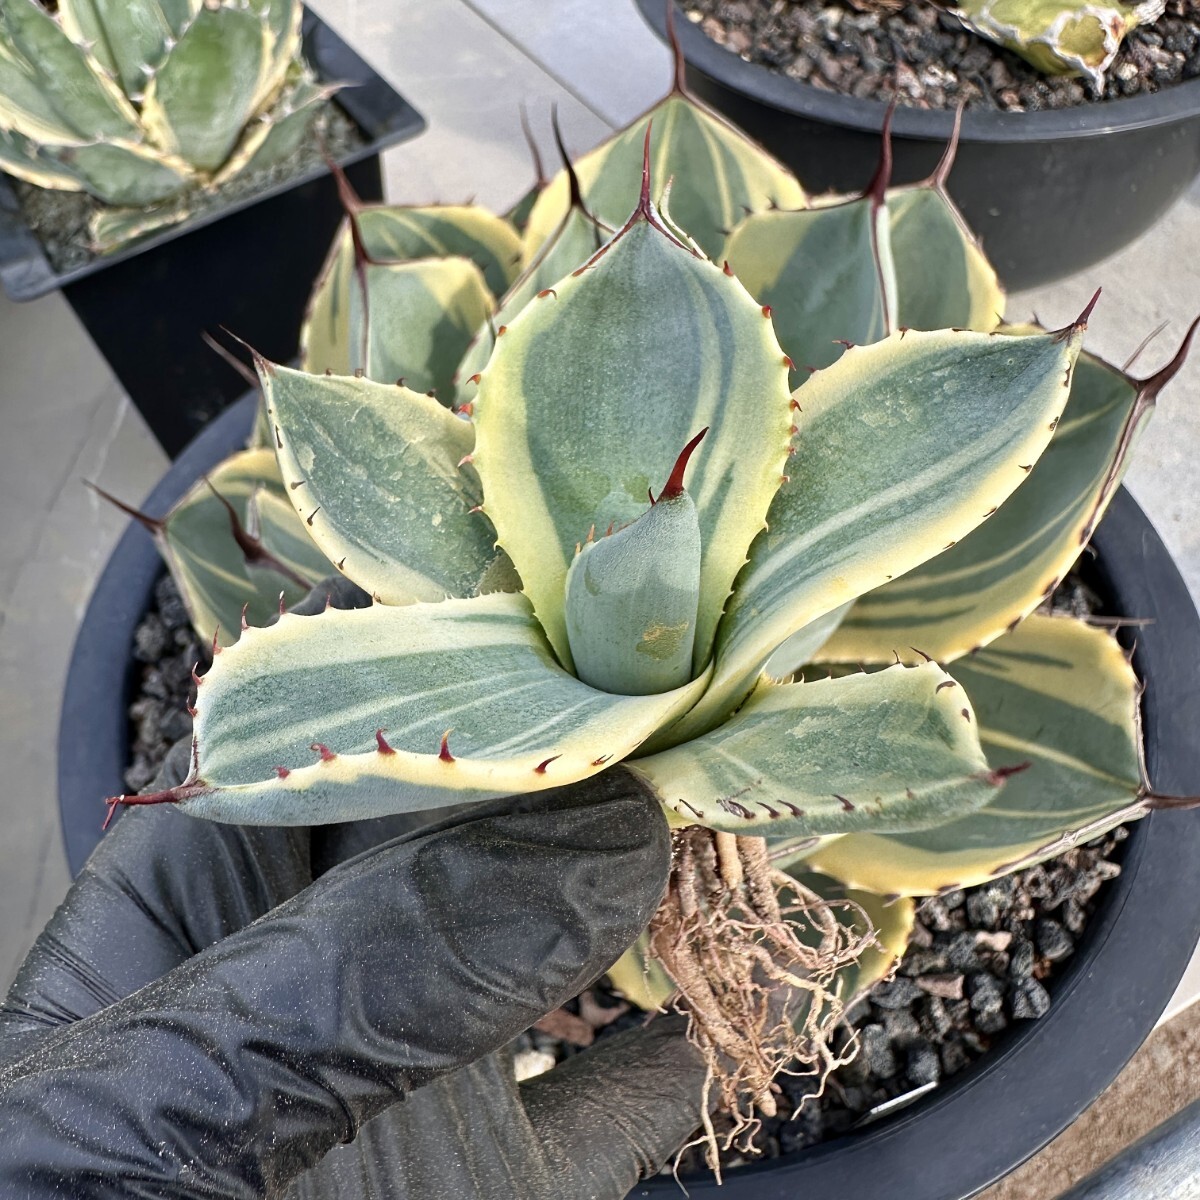 [Lj_plants] W131 agave Paris - tiger n car tao Liza ba rare . clear . special . own rearing parent stock direct thread . stock very superior DNA. stock 1 stock 